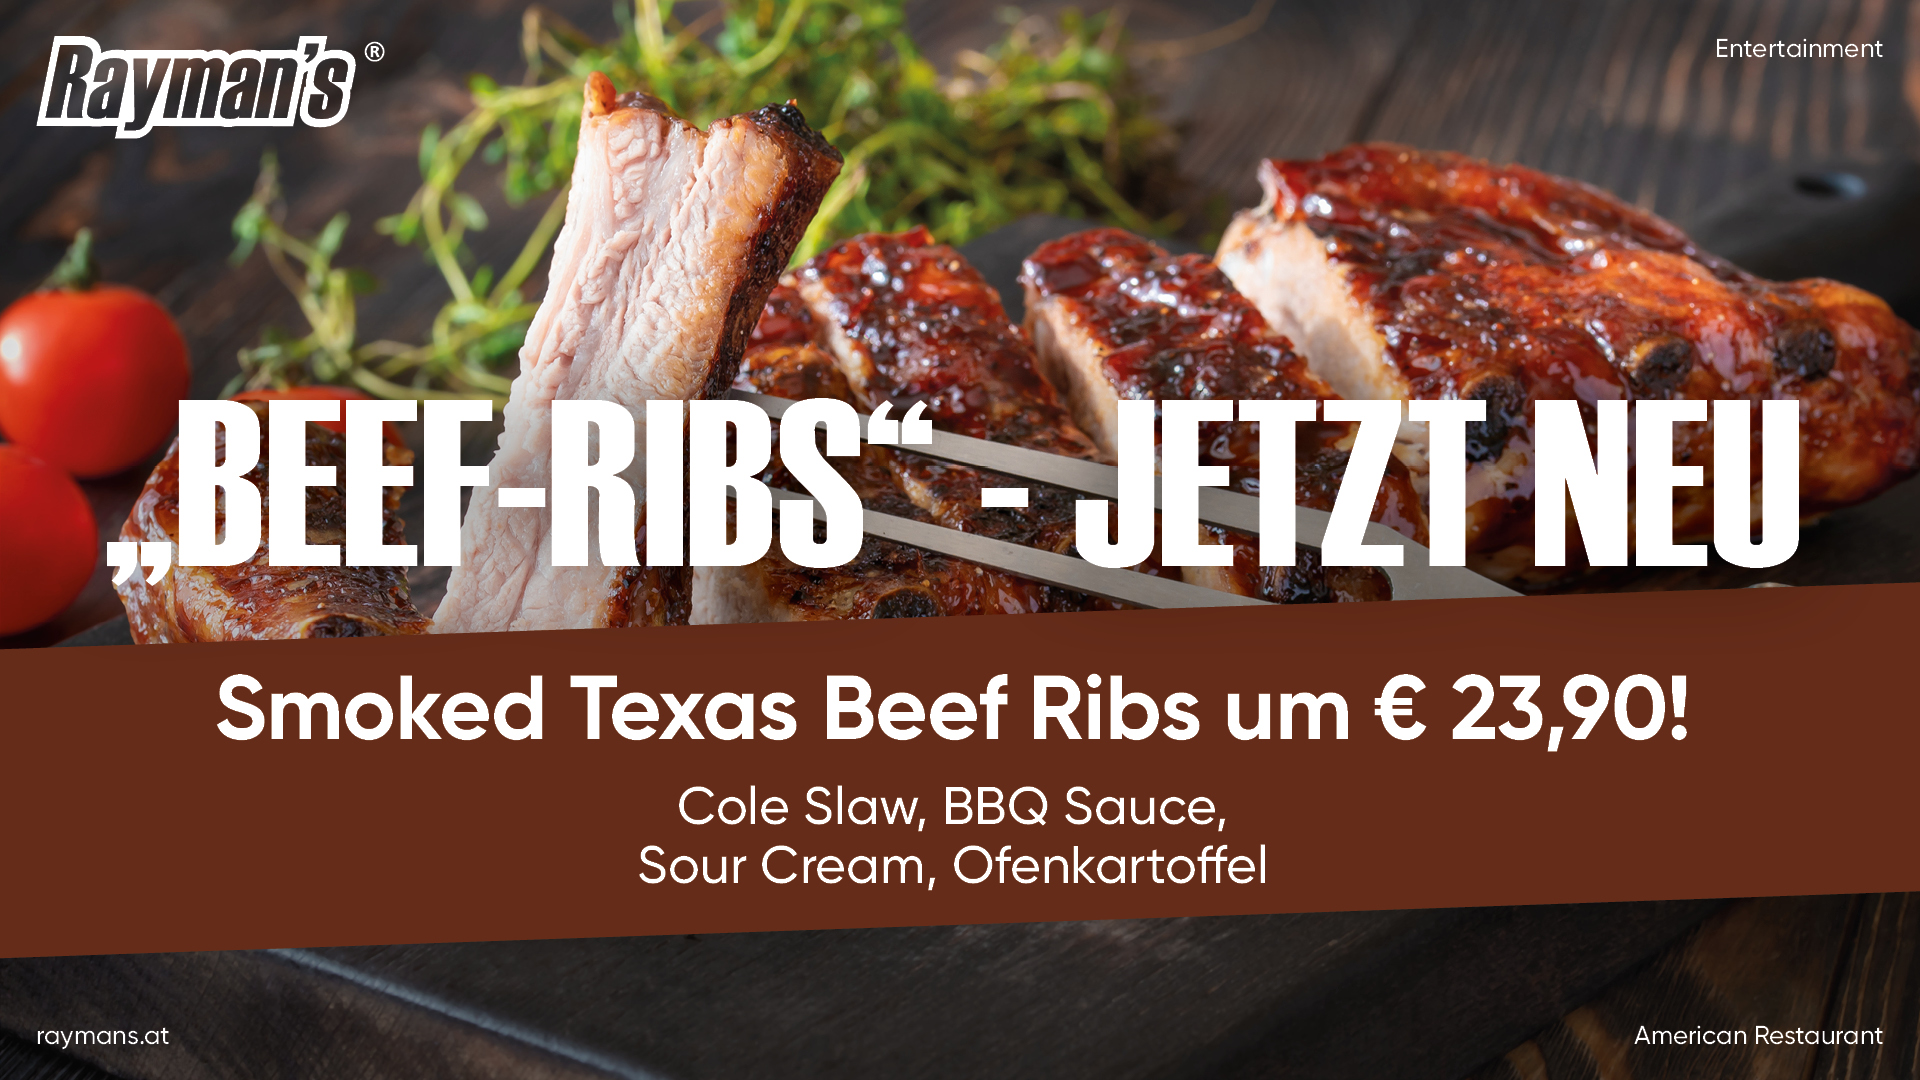 Raymans-TV-Sujets_BEEF RIBS